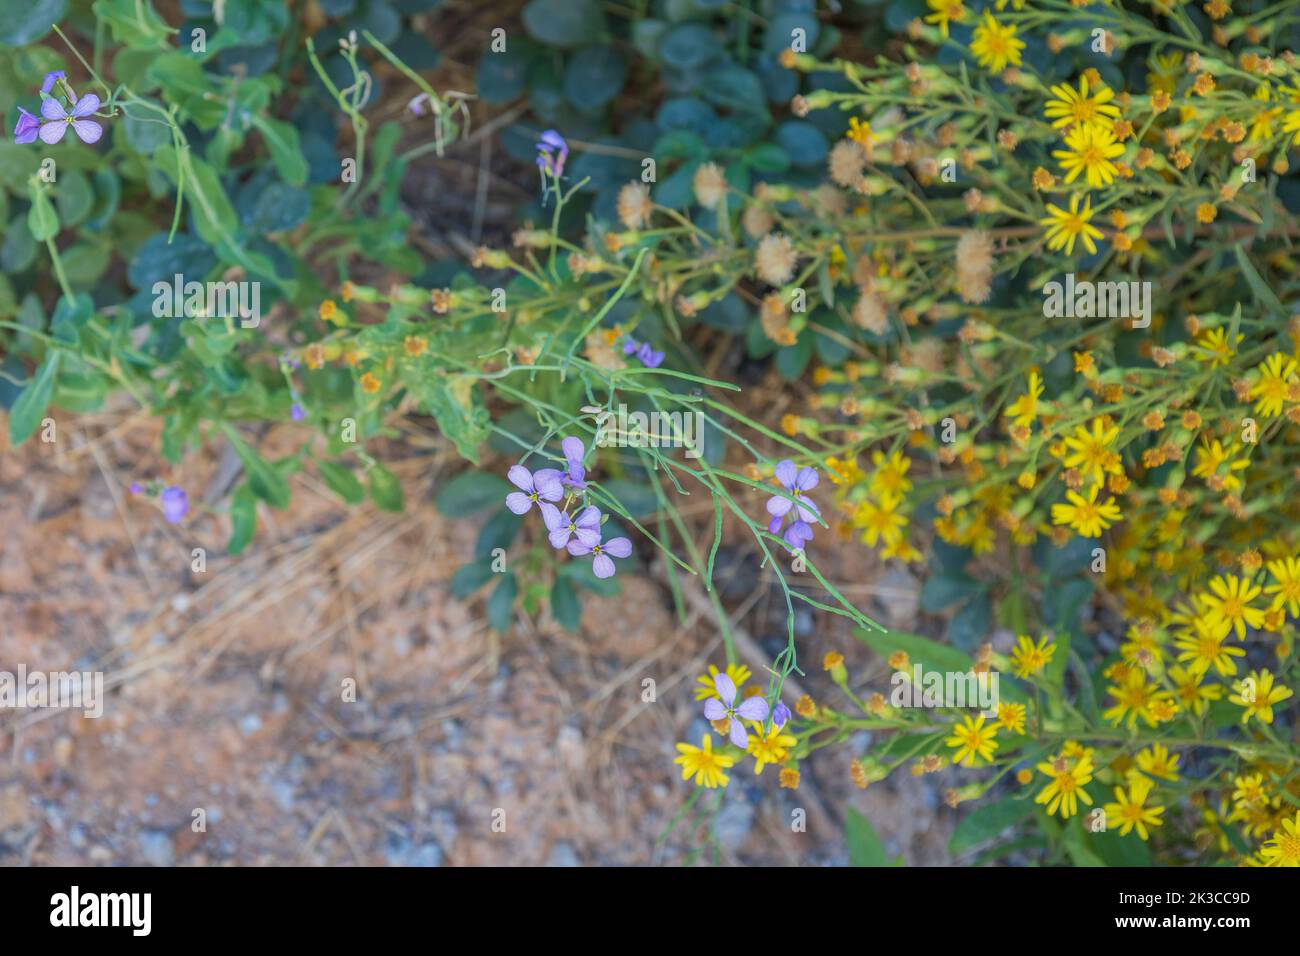 Moricandia arvensis, Purple Mistress Plant in Flower Growing Wild in the Spanish Countryside Stock Photo